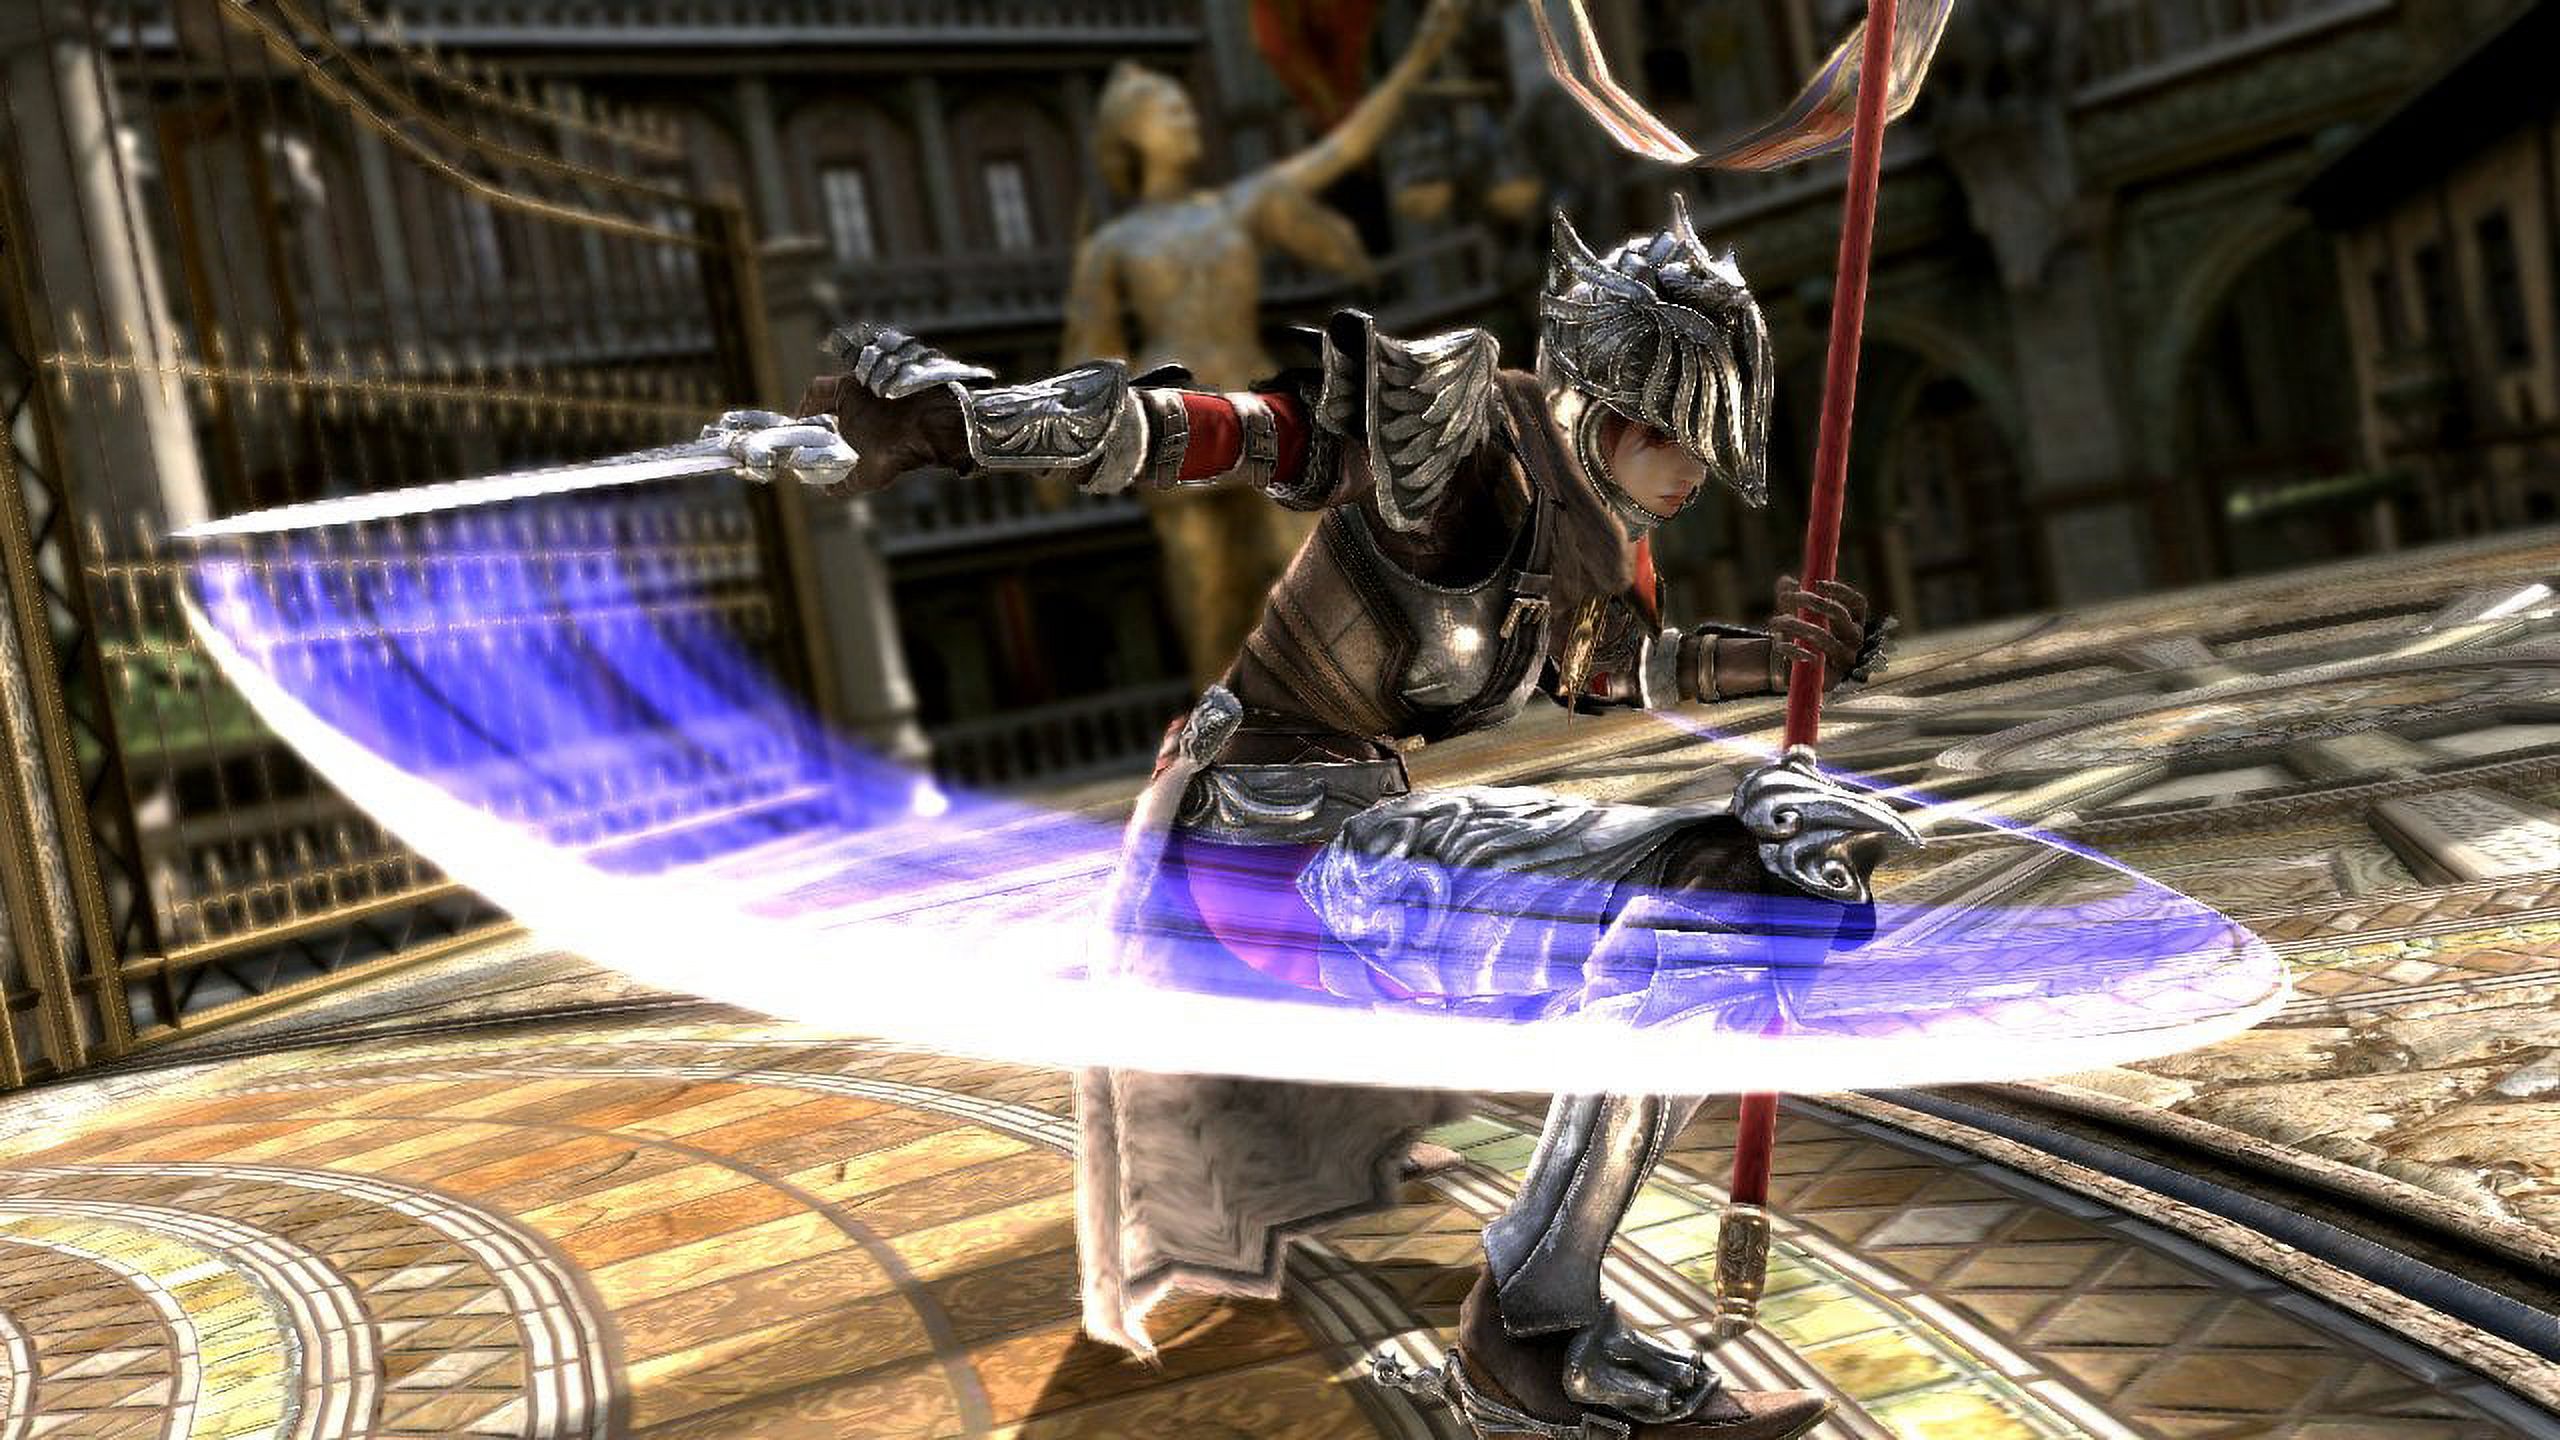 SoulCalibur V Collector's Edition - Playstation 3 - image 3 of 9